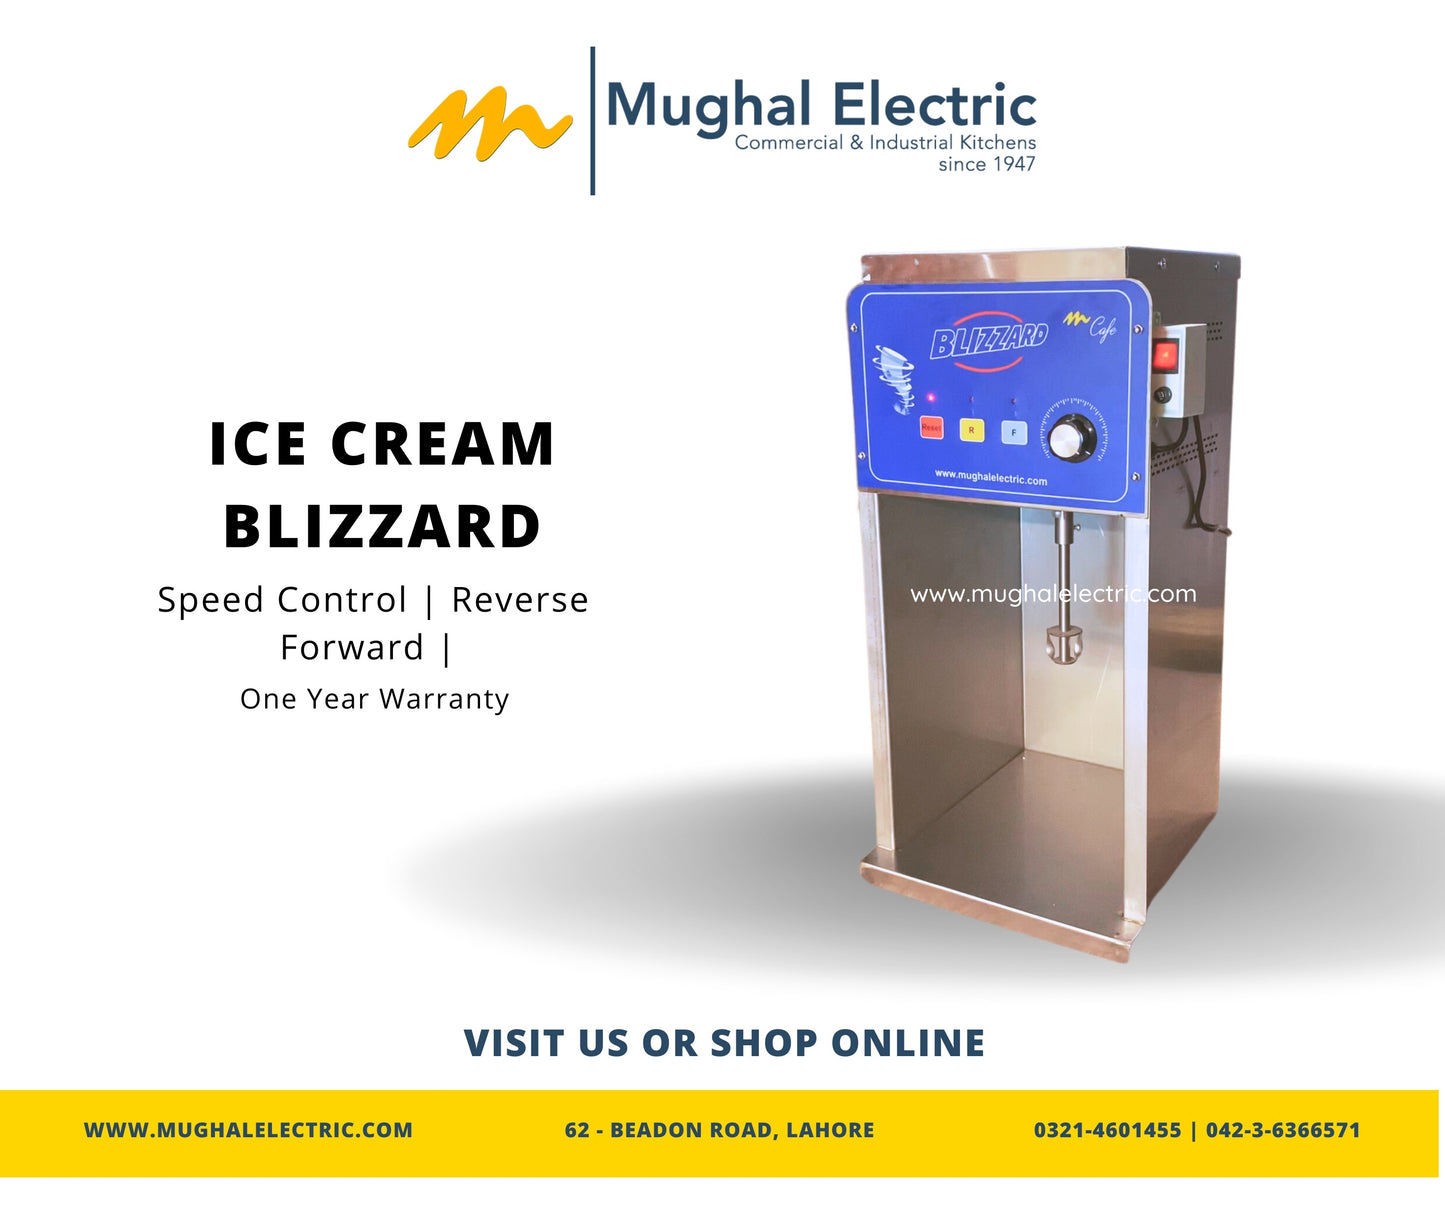 Ice cream blizzard machine for ice cream shakes and toppings